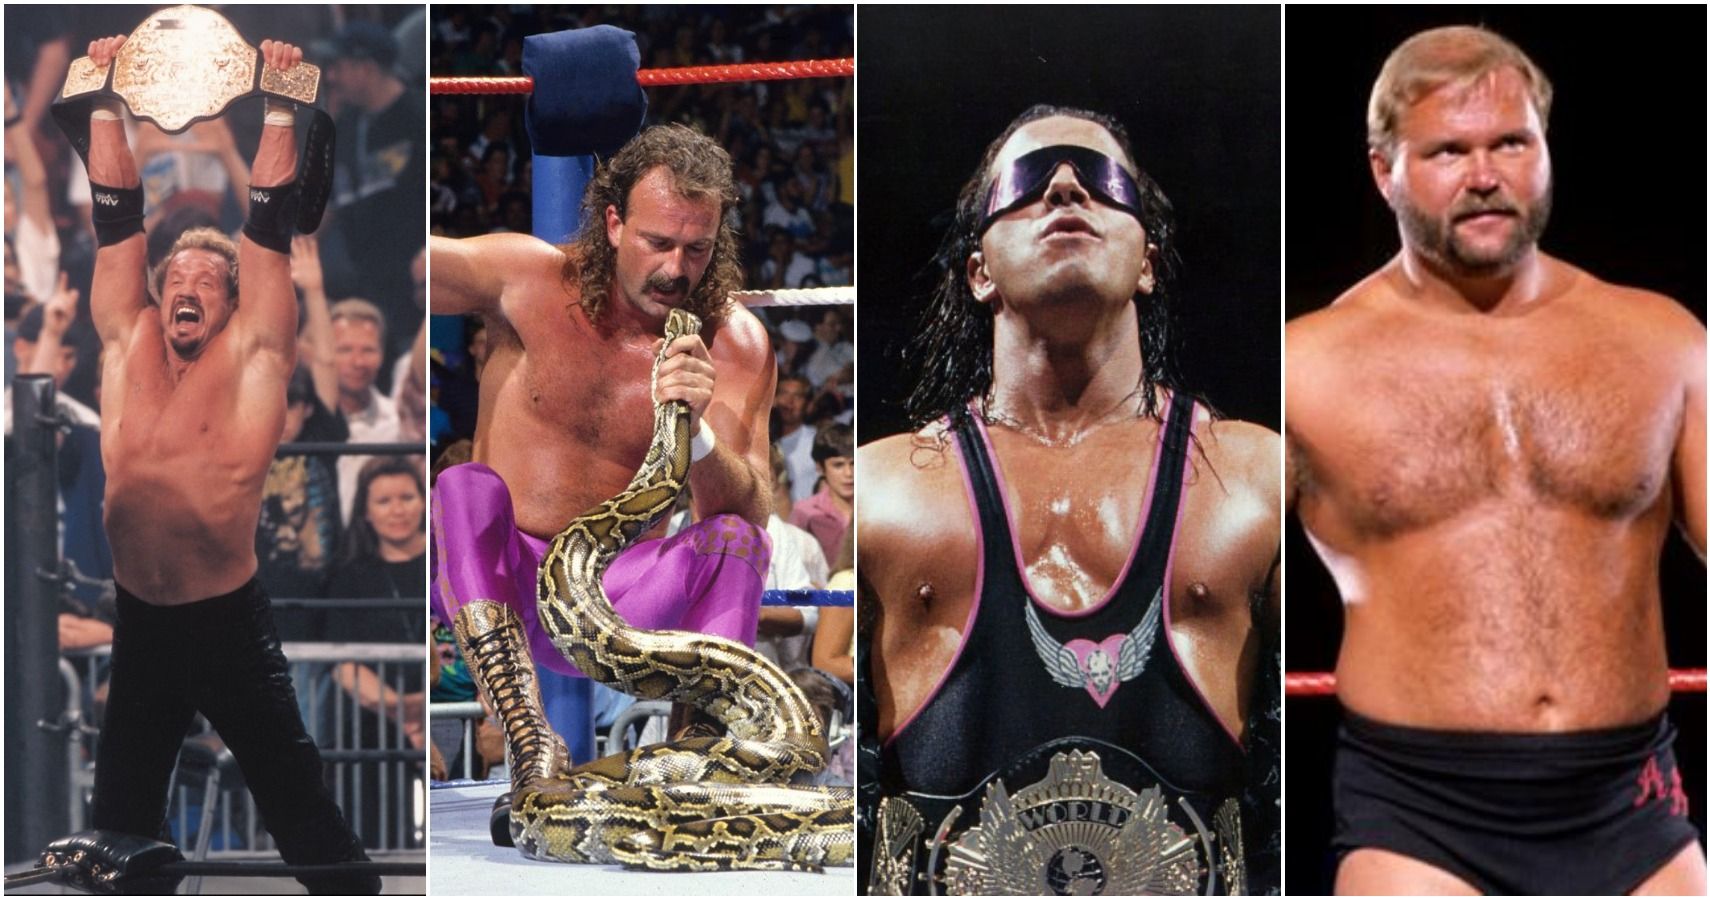 10 Interesting Facts About WWE Legends Who Have Appeared on AEW